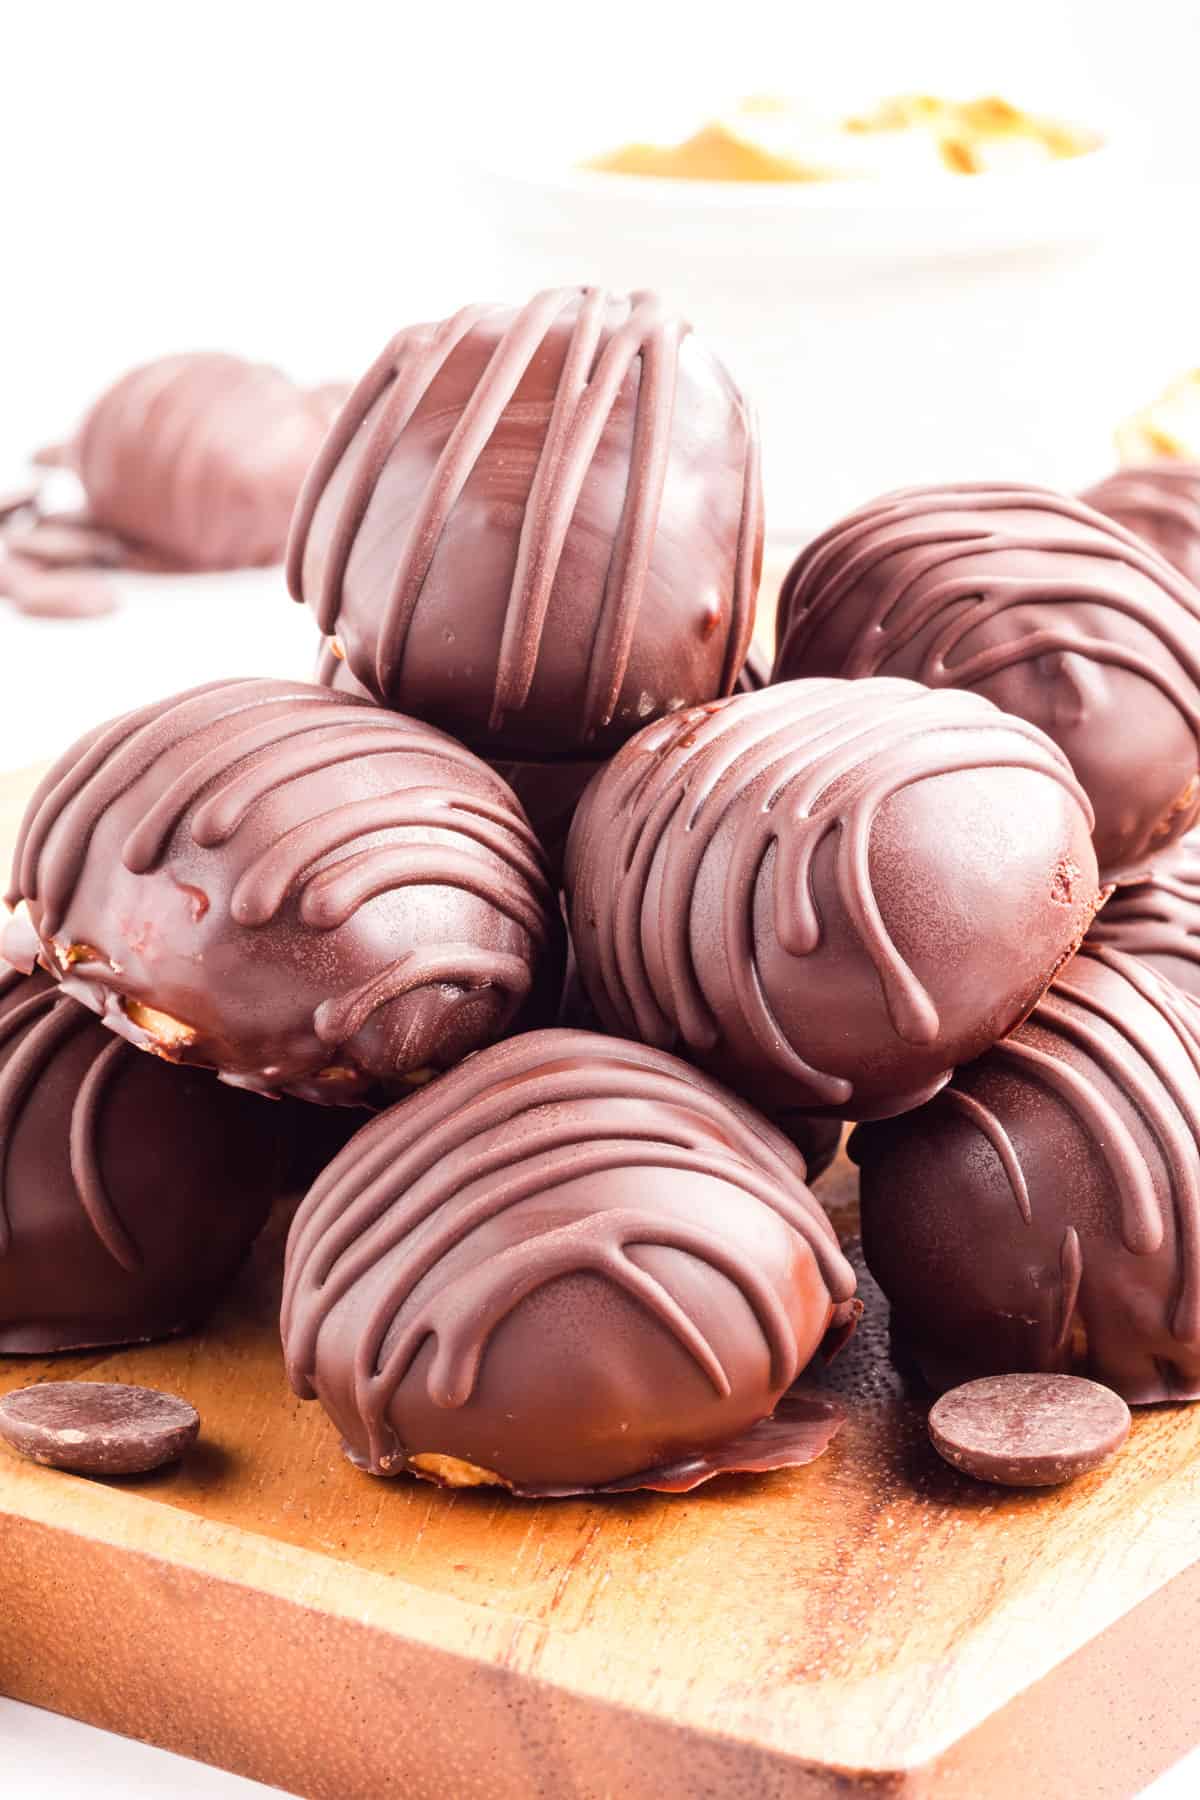 A bunch of round chocolate covered treats.